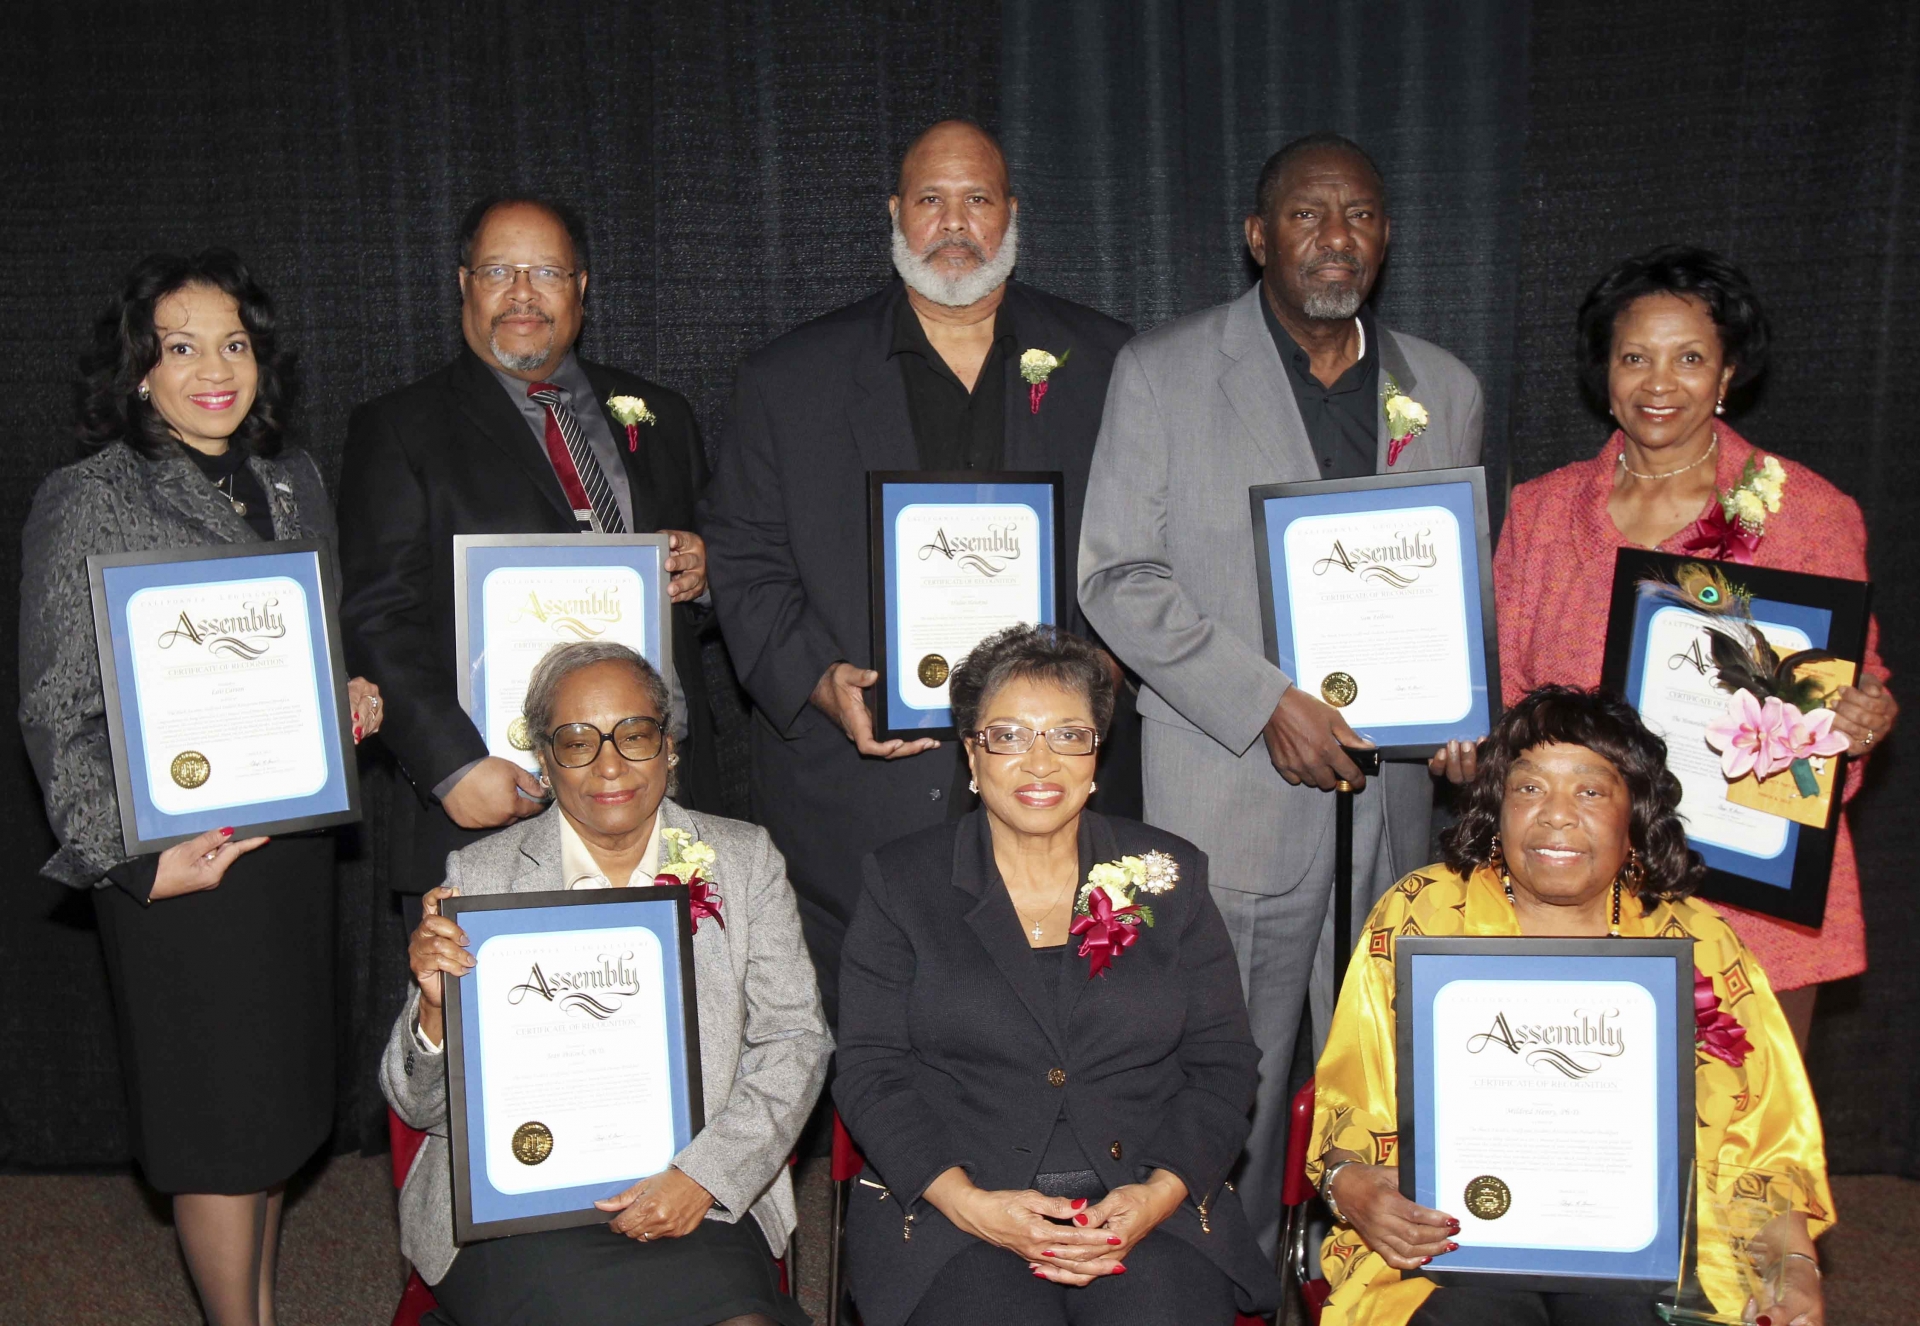 From left, Twillea Evans-Carthen, J. Milton Clark, Walter Hawkins, Sam Fellows and Amina Carter, Jean Peacock, Cheryl Brown and Dr. Mildred Henry.